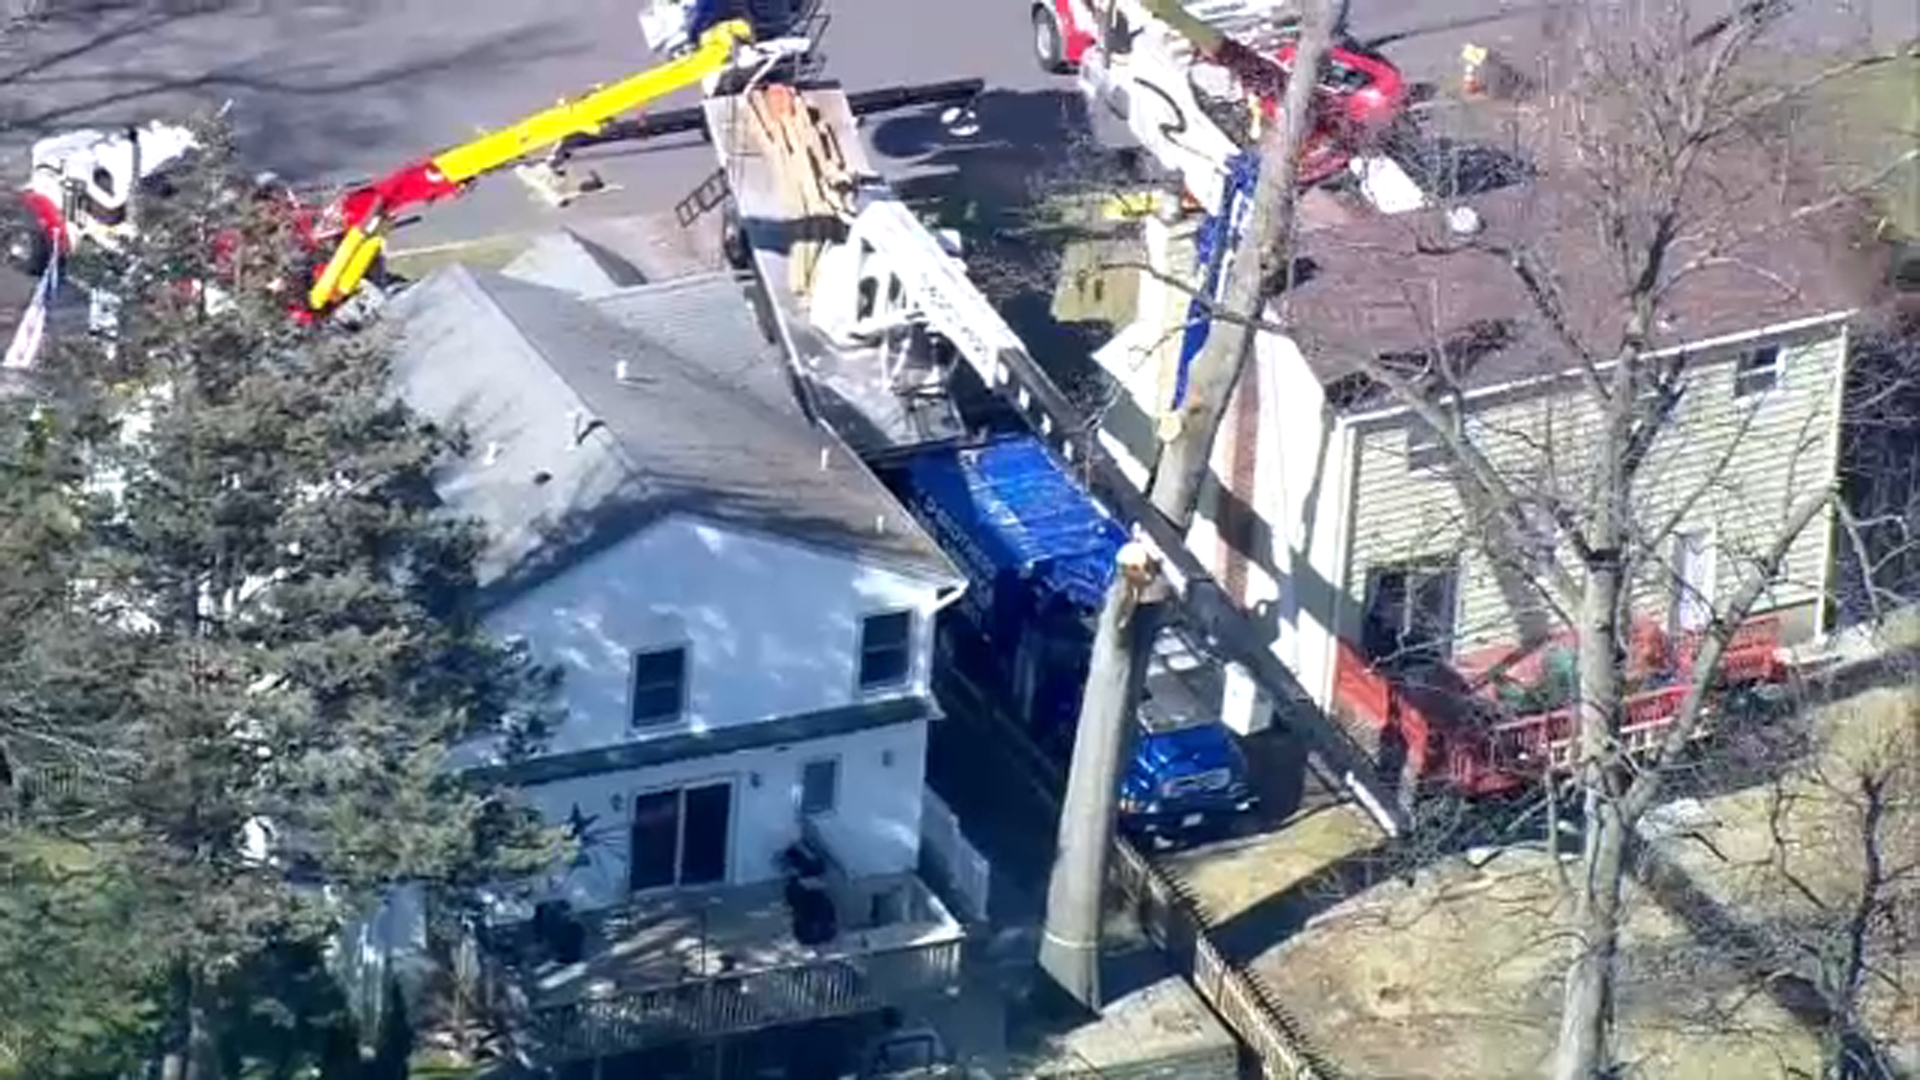 Photos show large construction crane collapsed, tangled in power wires in Cresskill, New Jersey